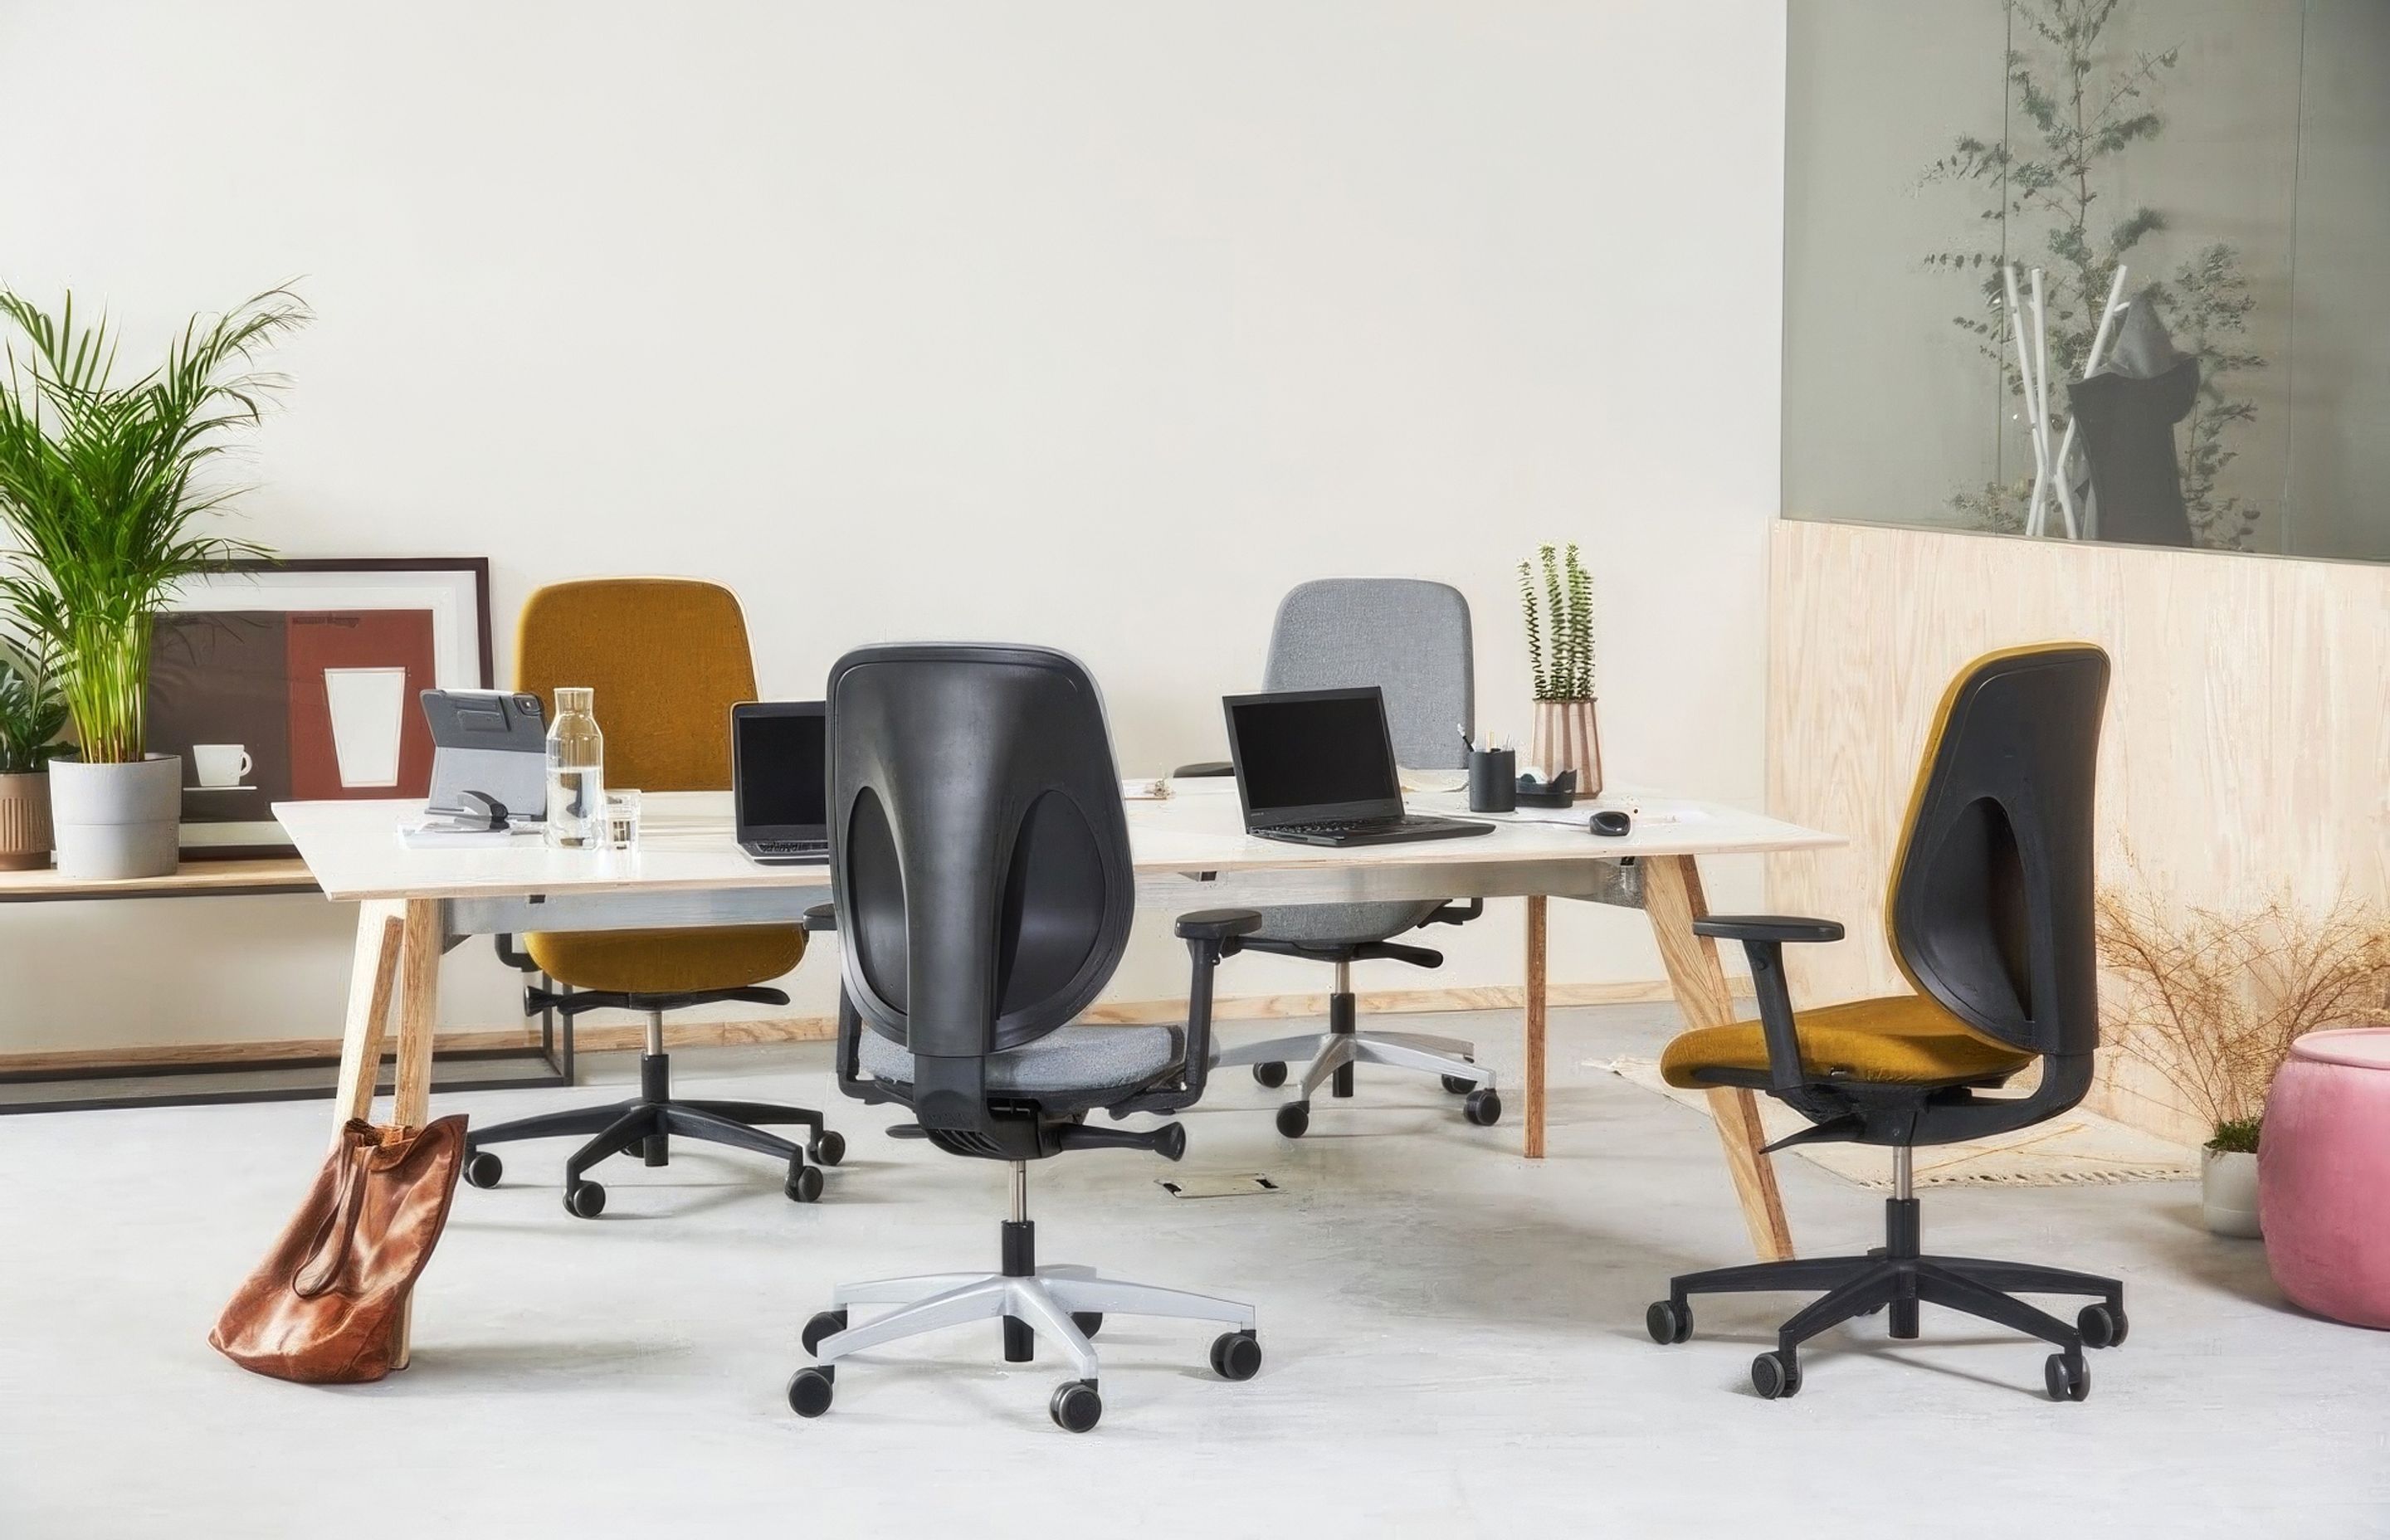 Giroflex chairs and Cradle 2 Cradle Certified, including a circular design philosophy and buy-back schemes in several nations. Featured chairs: giroflex 353